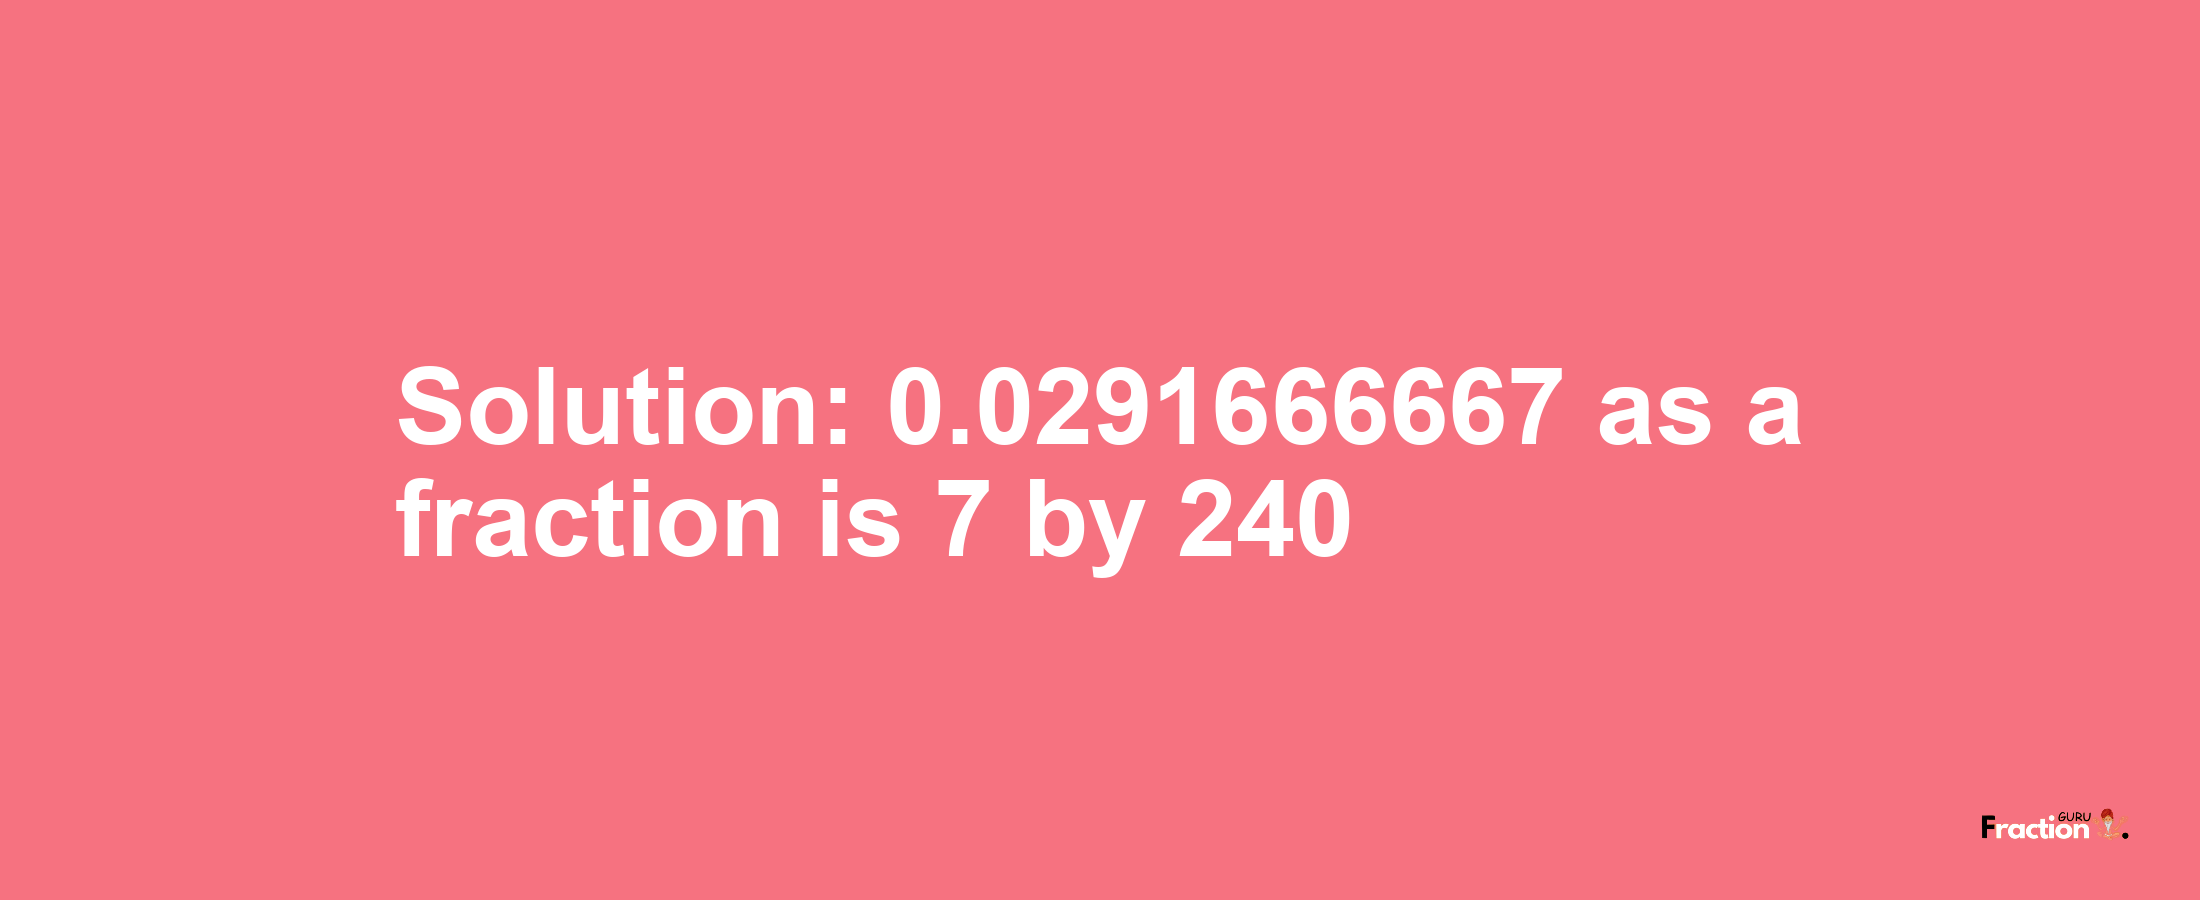 Solution:0.0291666667 as a fraction is 7/240